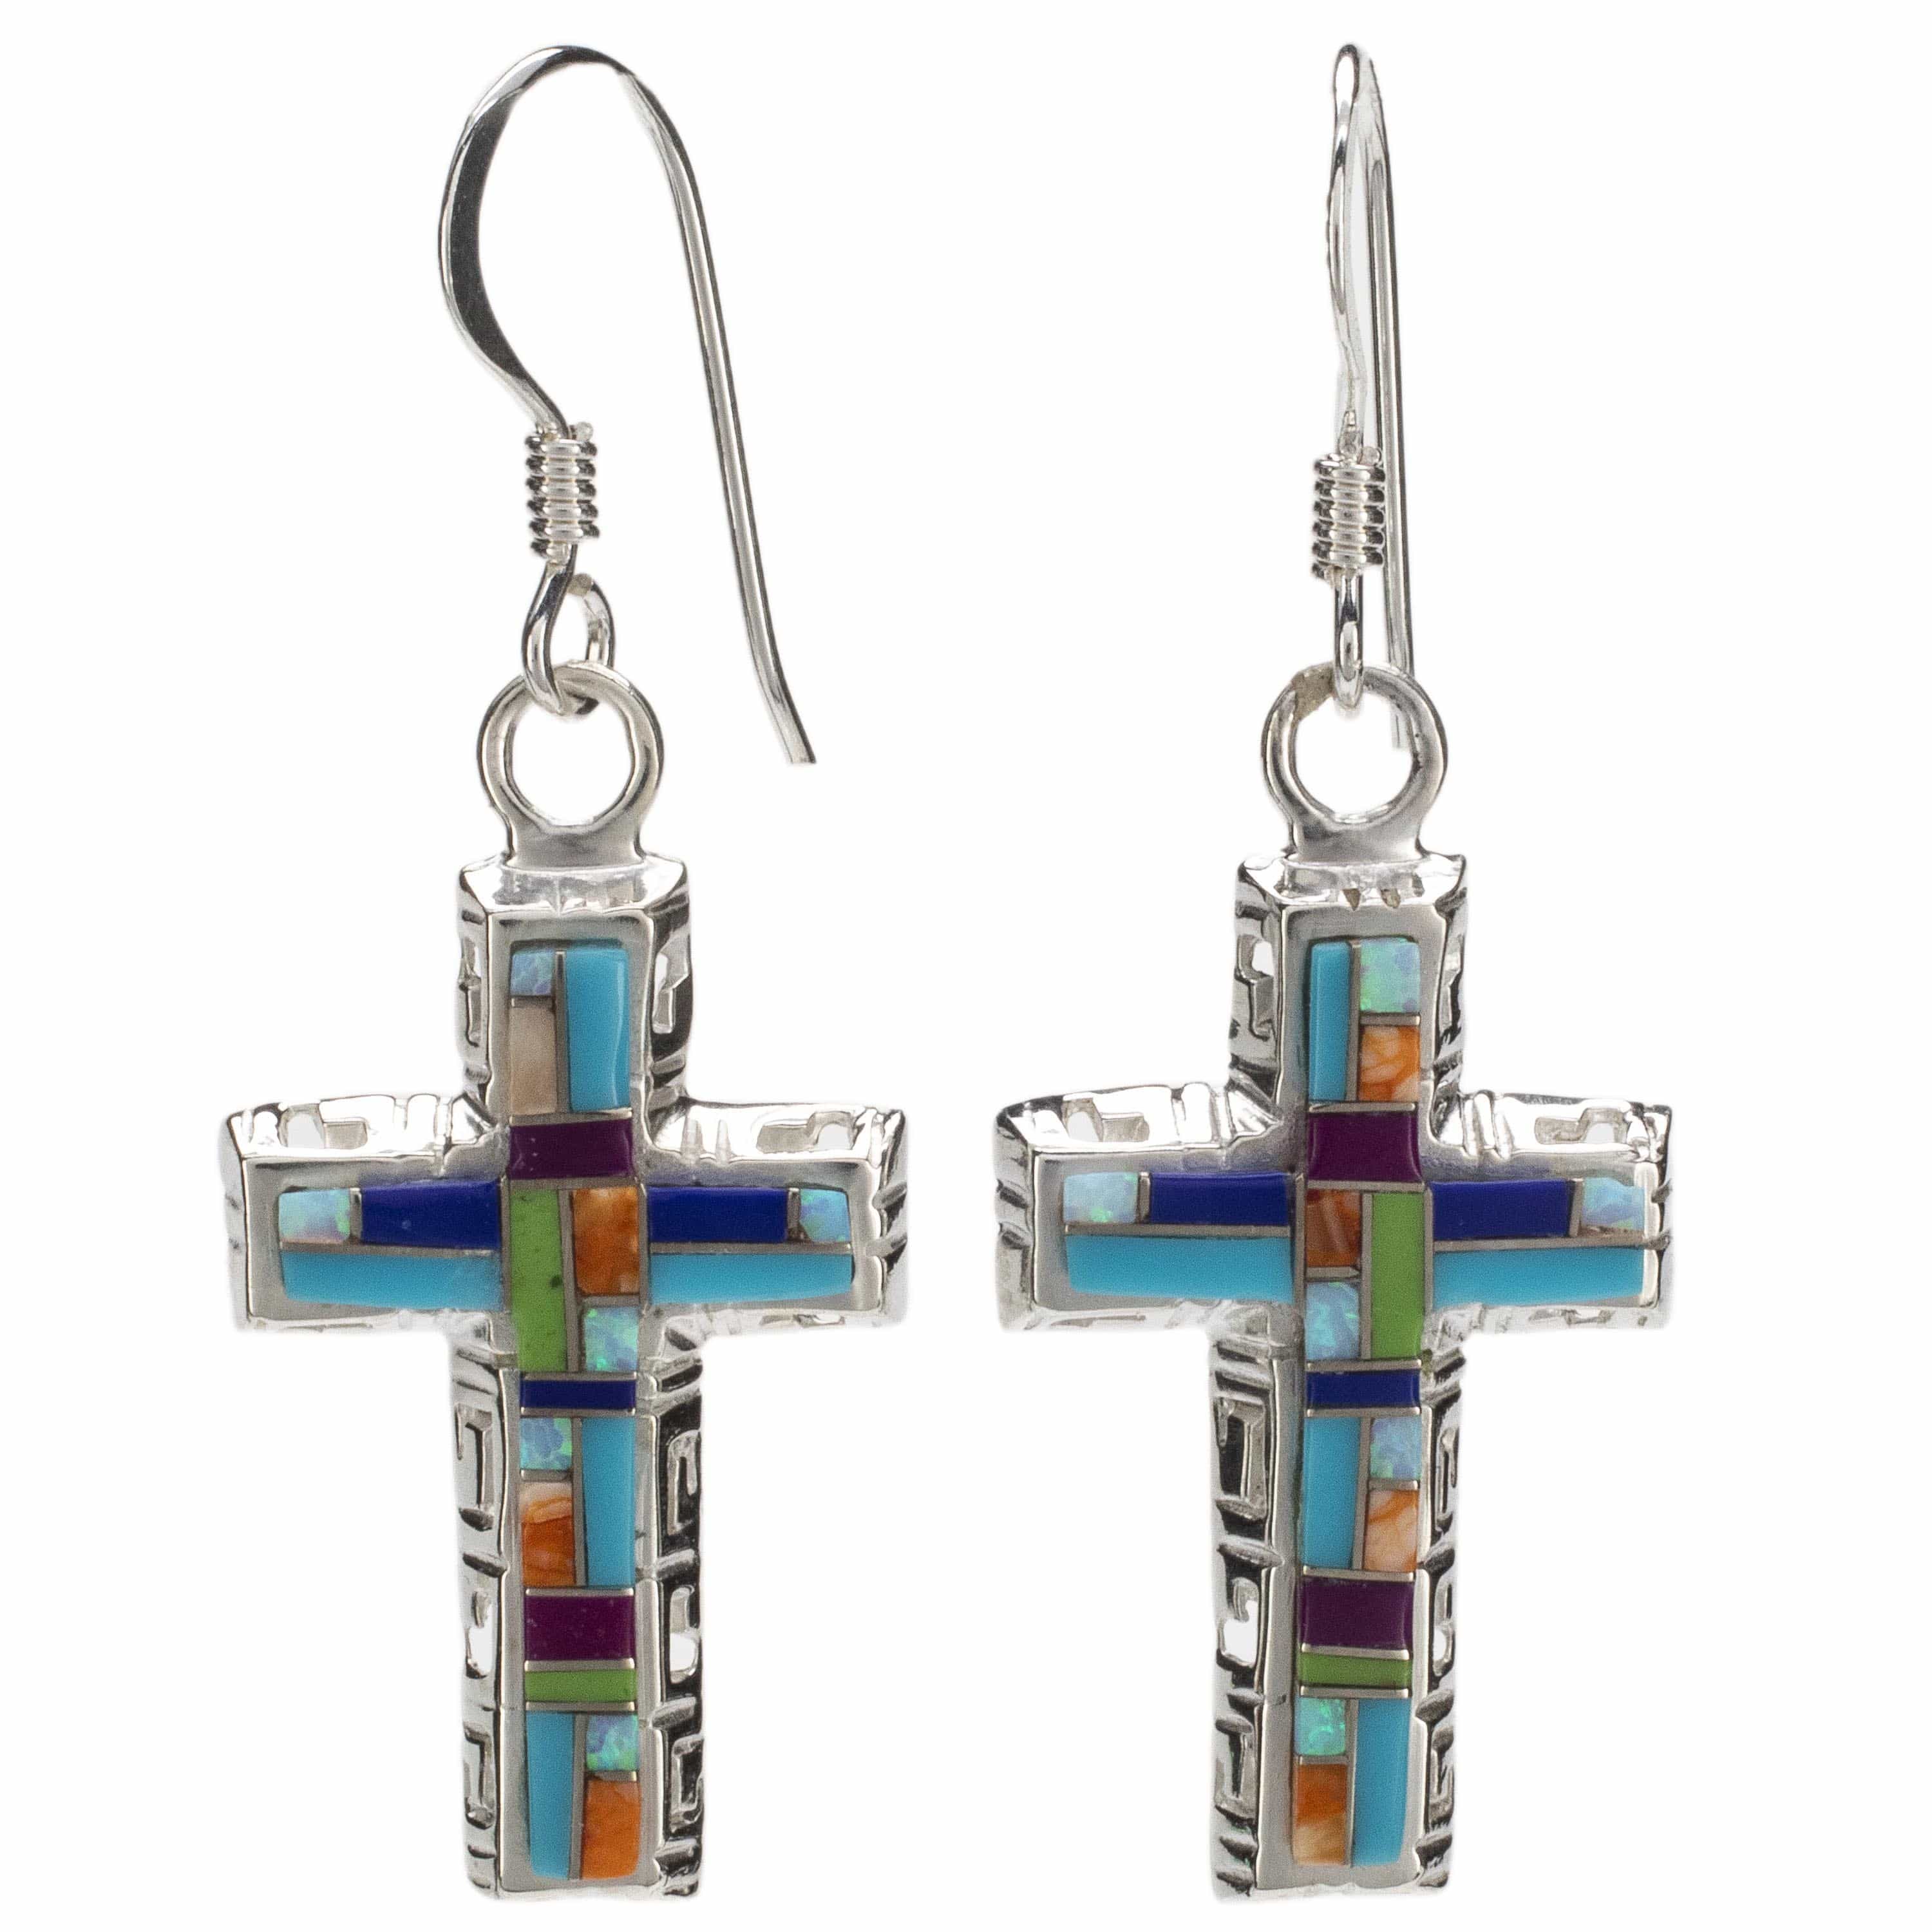 Kalifano Southwest Silver Jewelry Multi Gemstone Cross Earrings Handmade with Sterling Silver and Opal Accent NME.0587.MT